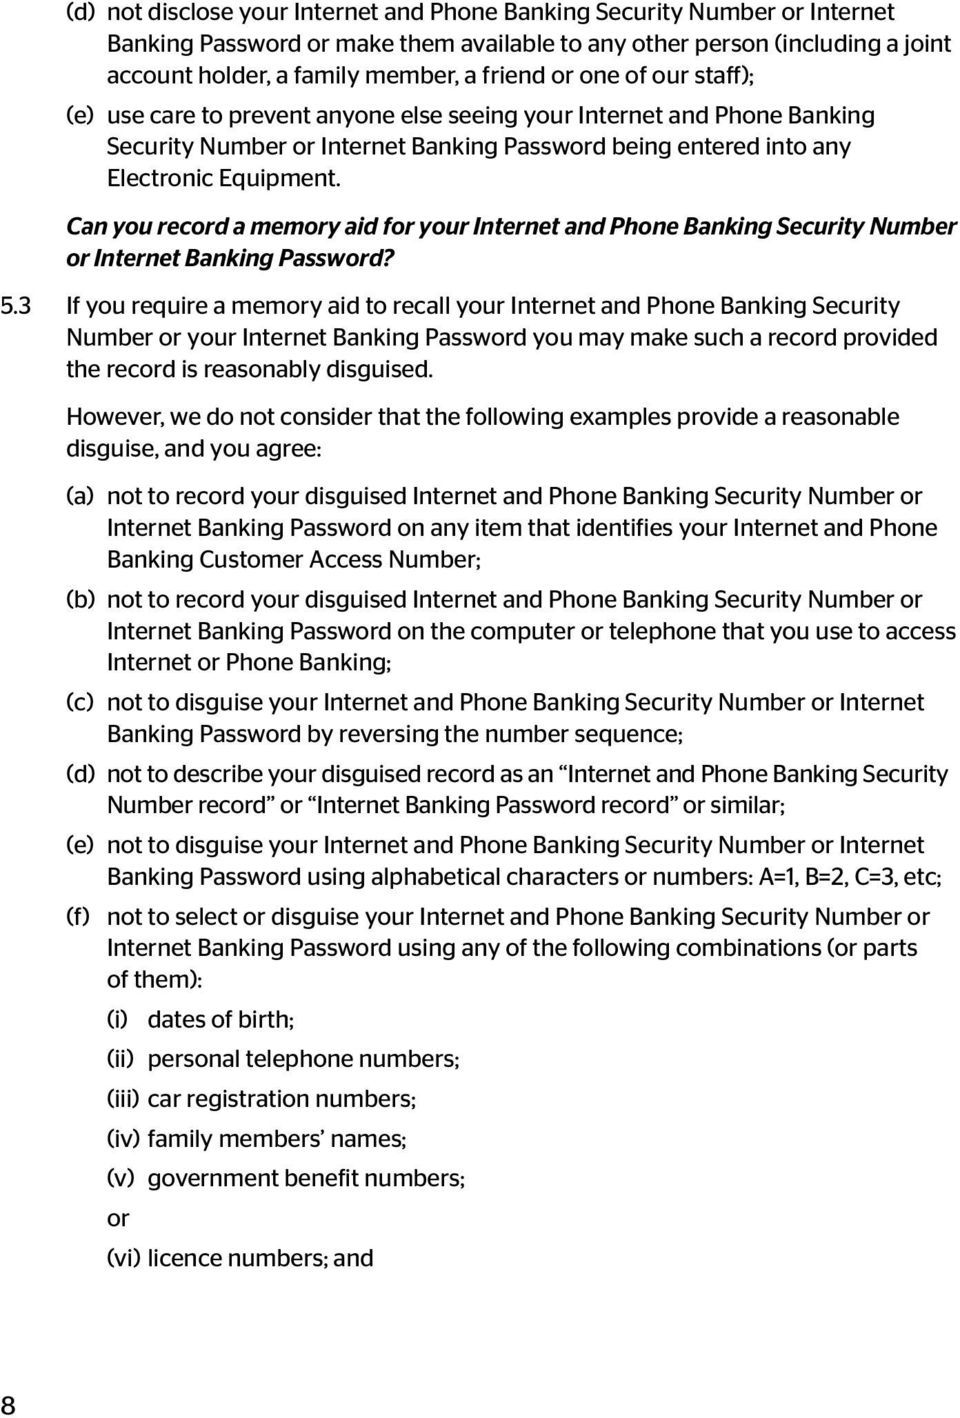 Can you record a memory aid for your Internet and Phone Banking Security Number or Internet Banking Password? 5.